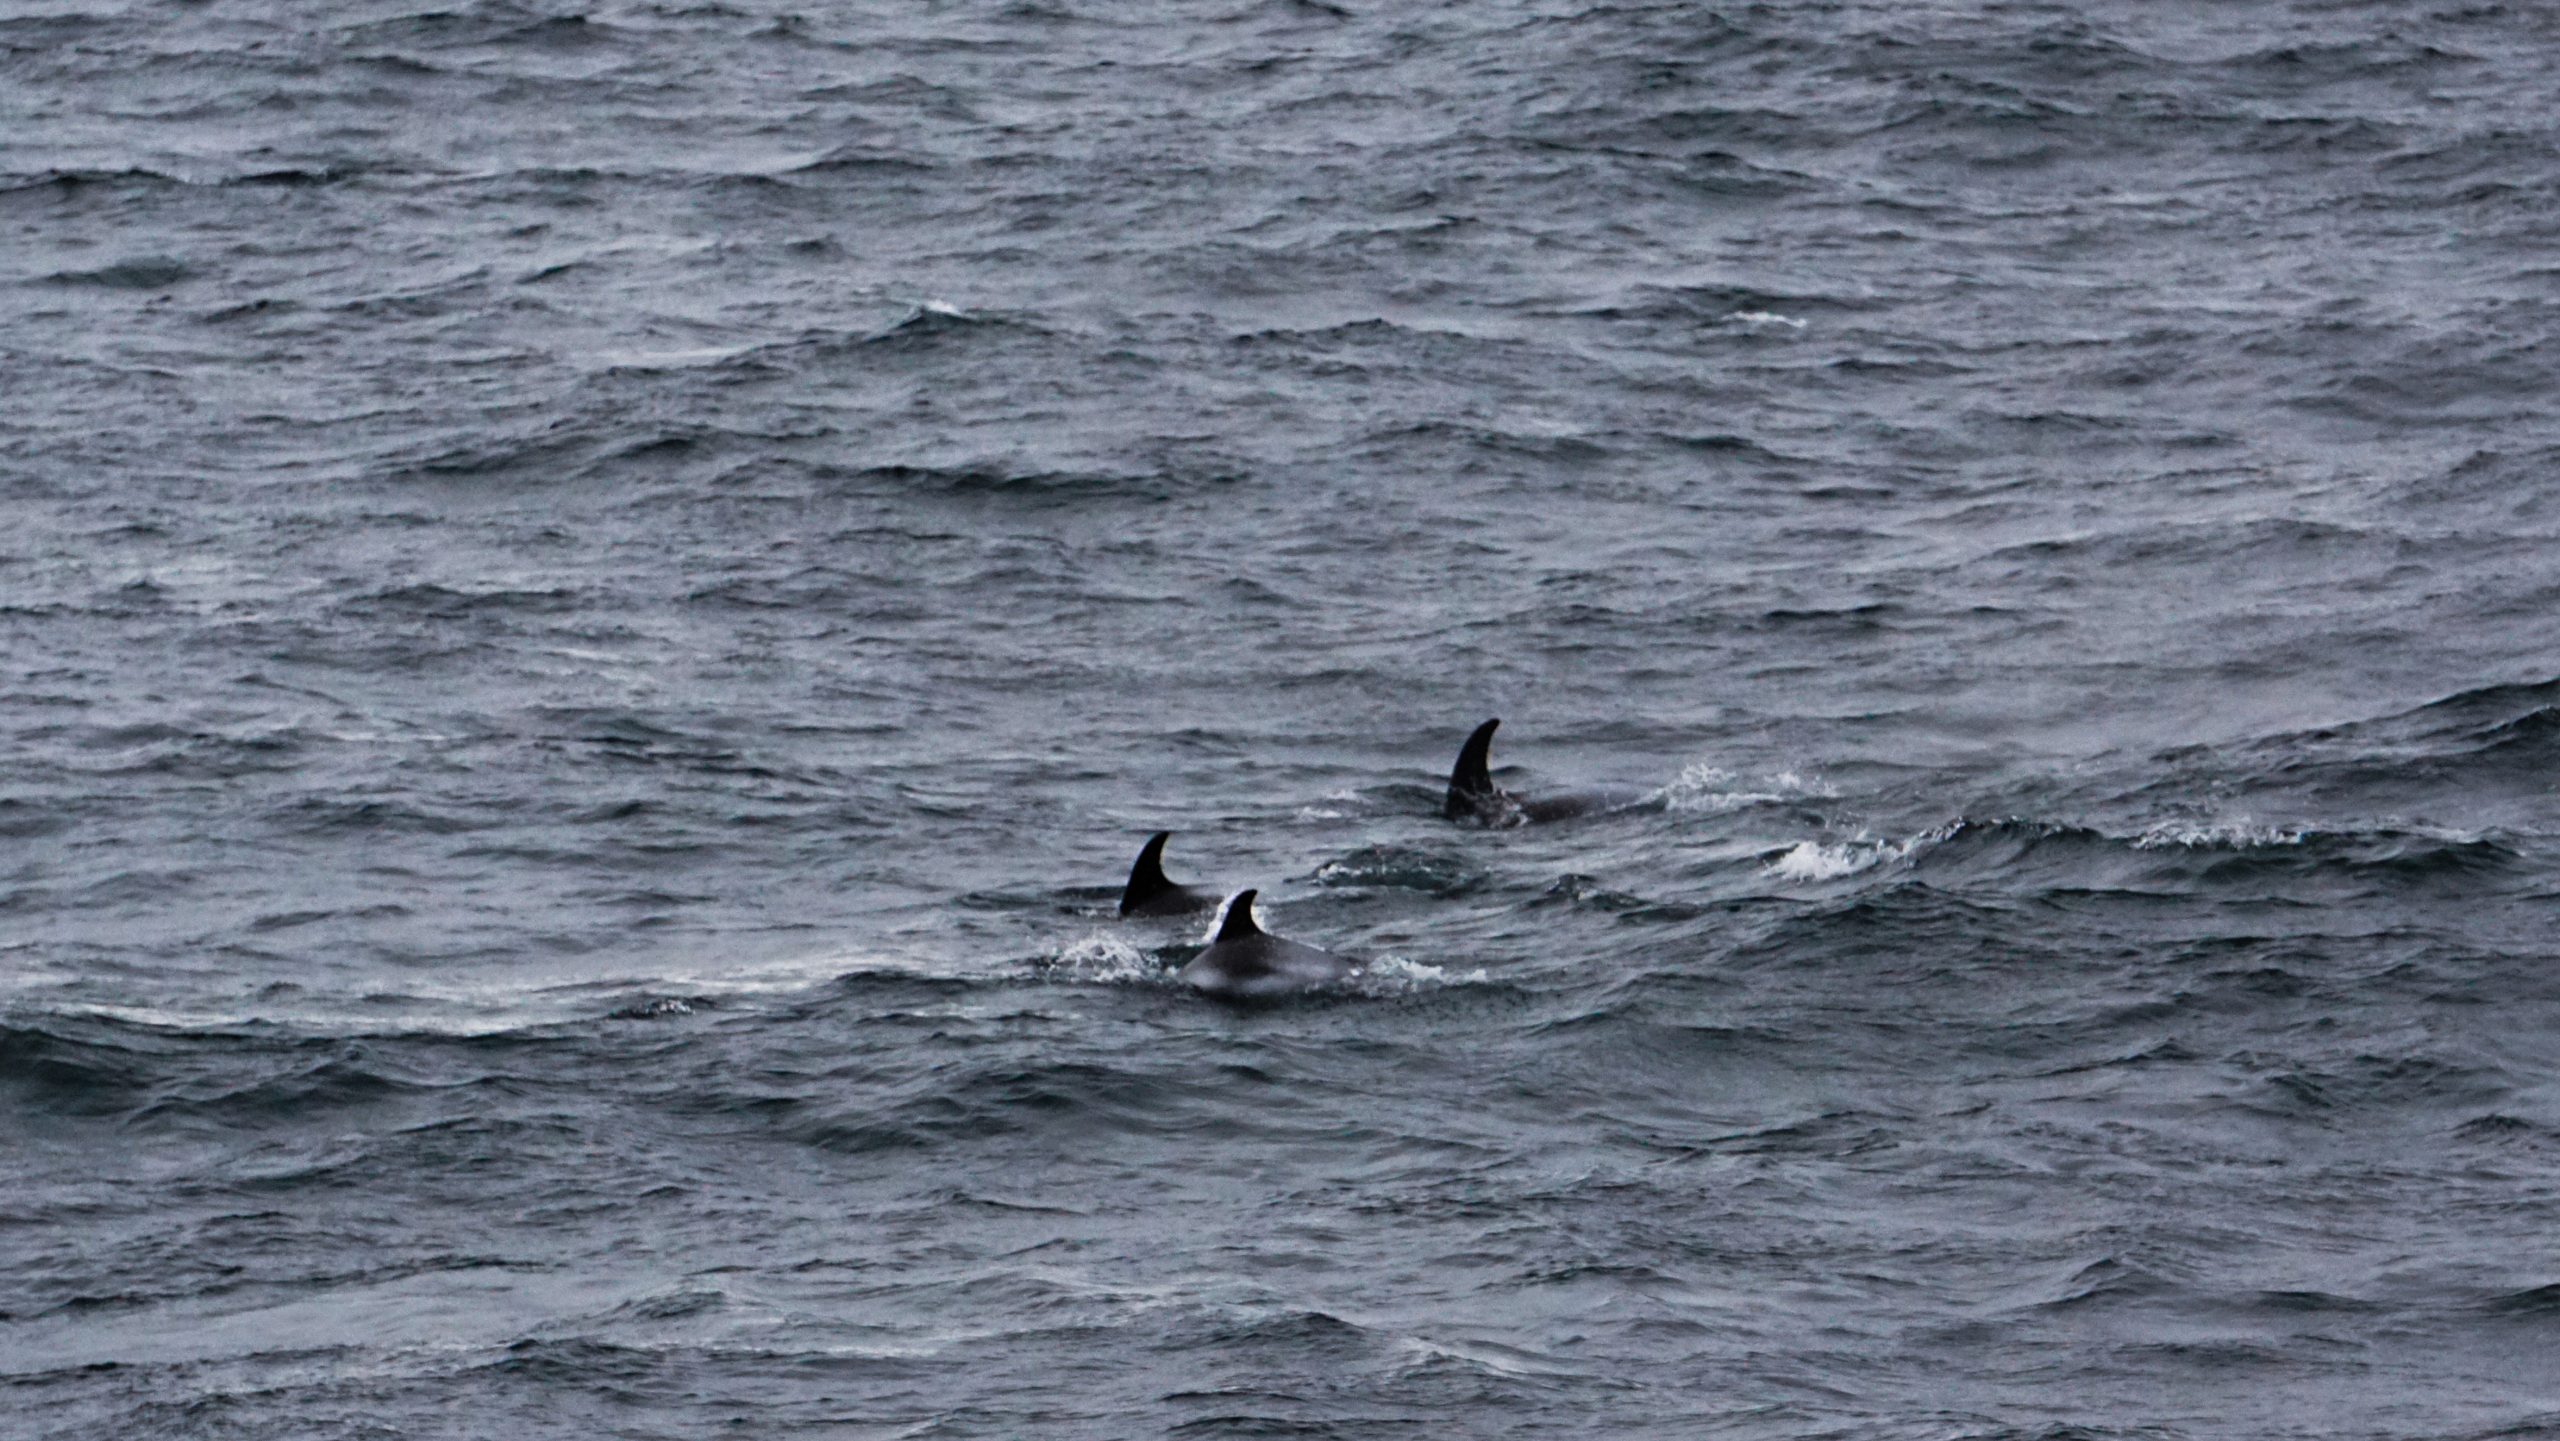 Three dolphin fins in the water